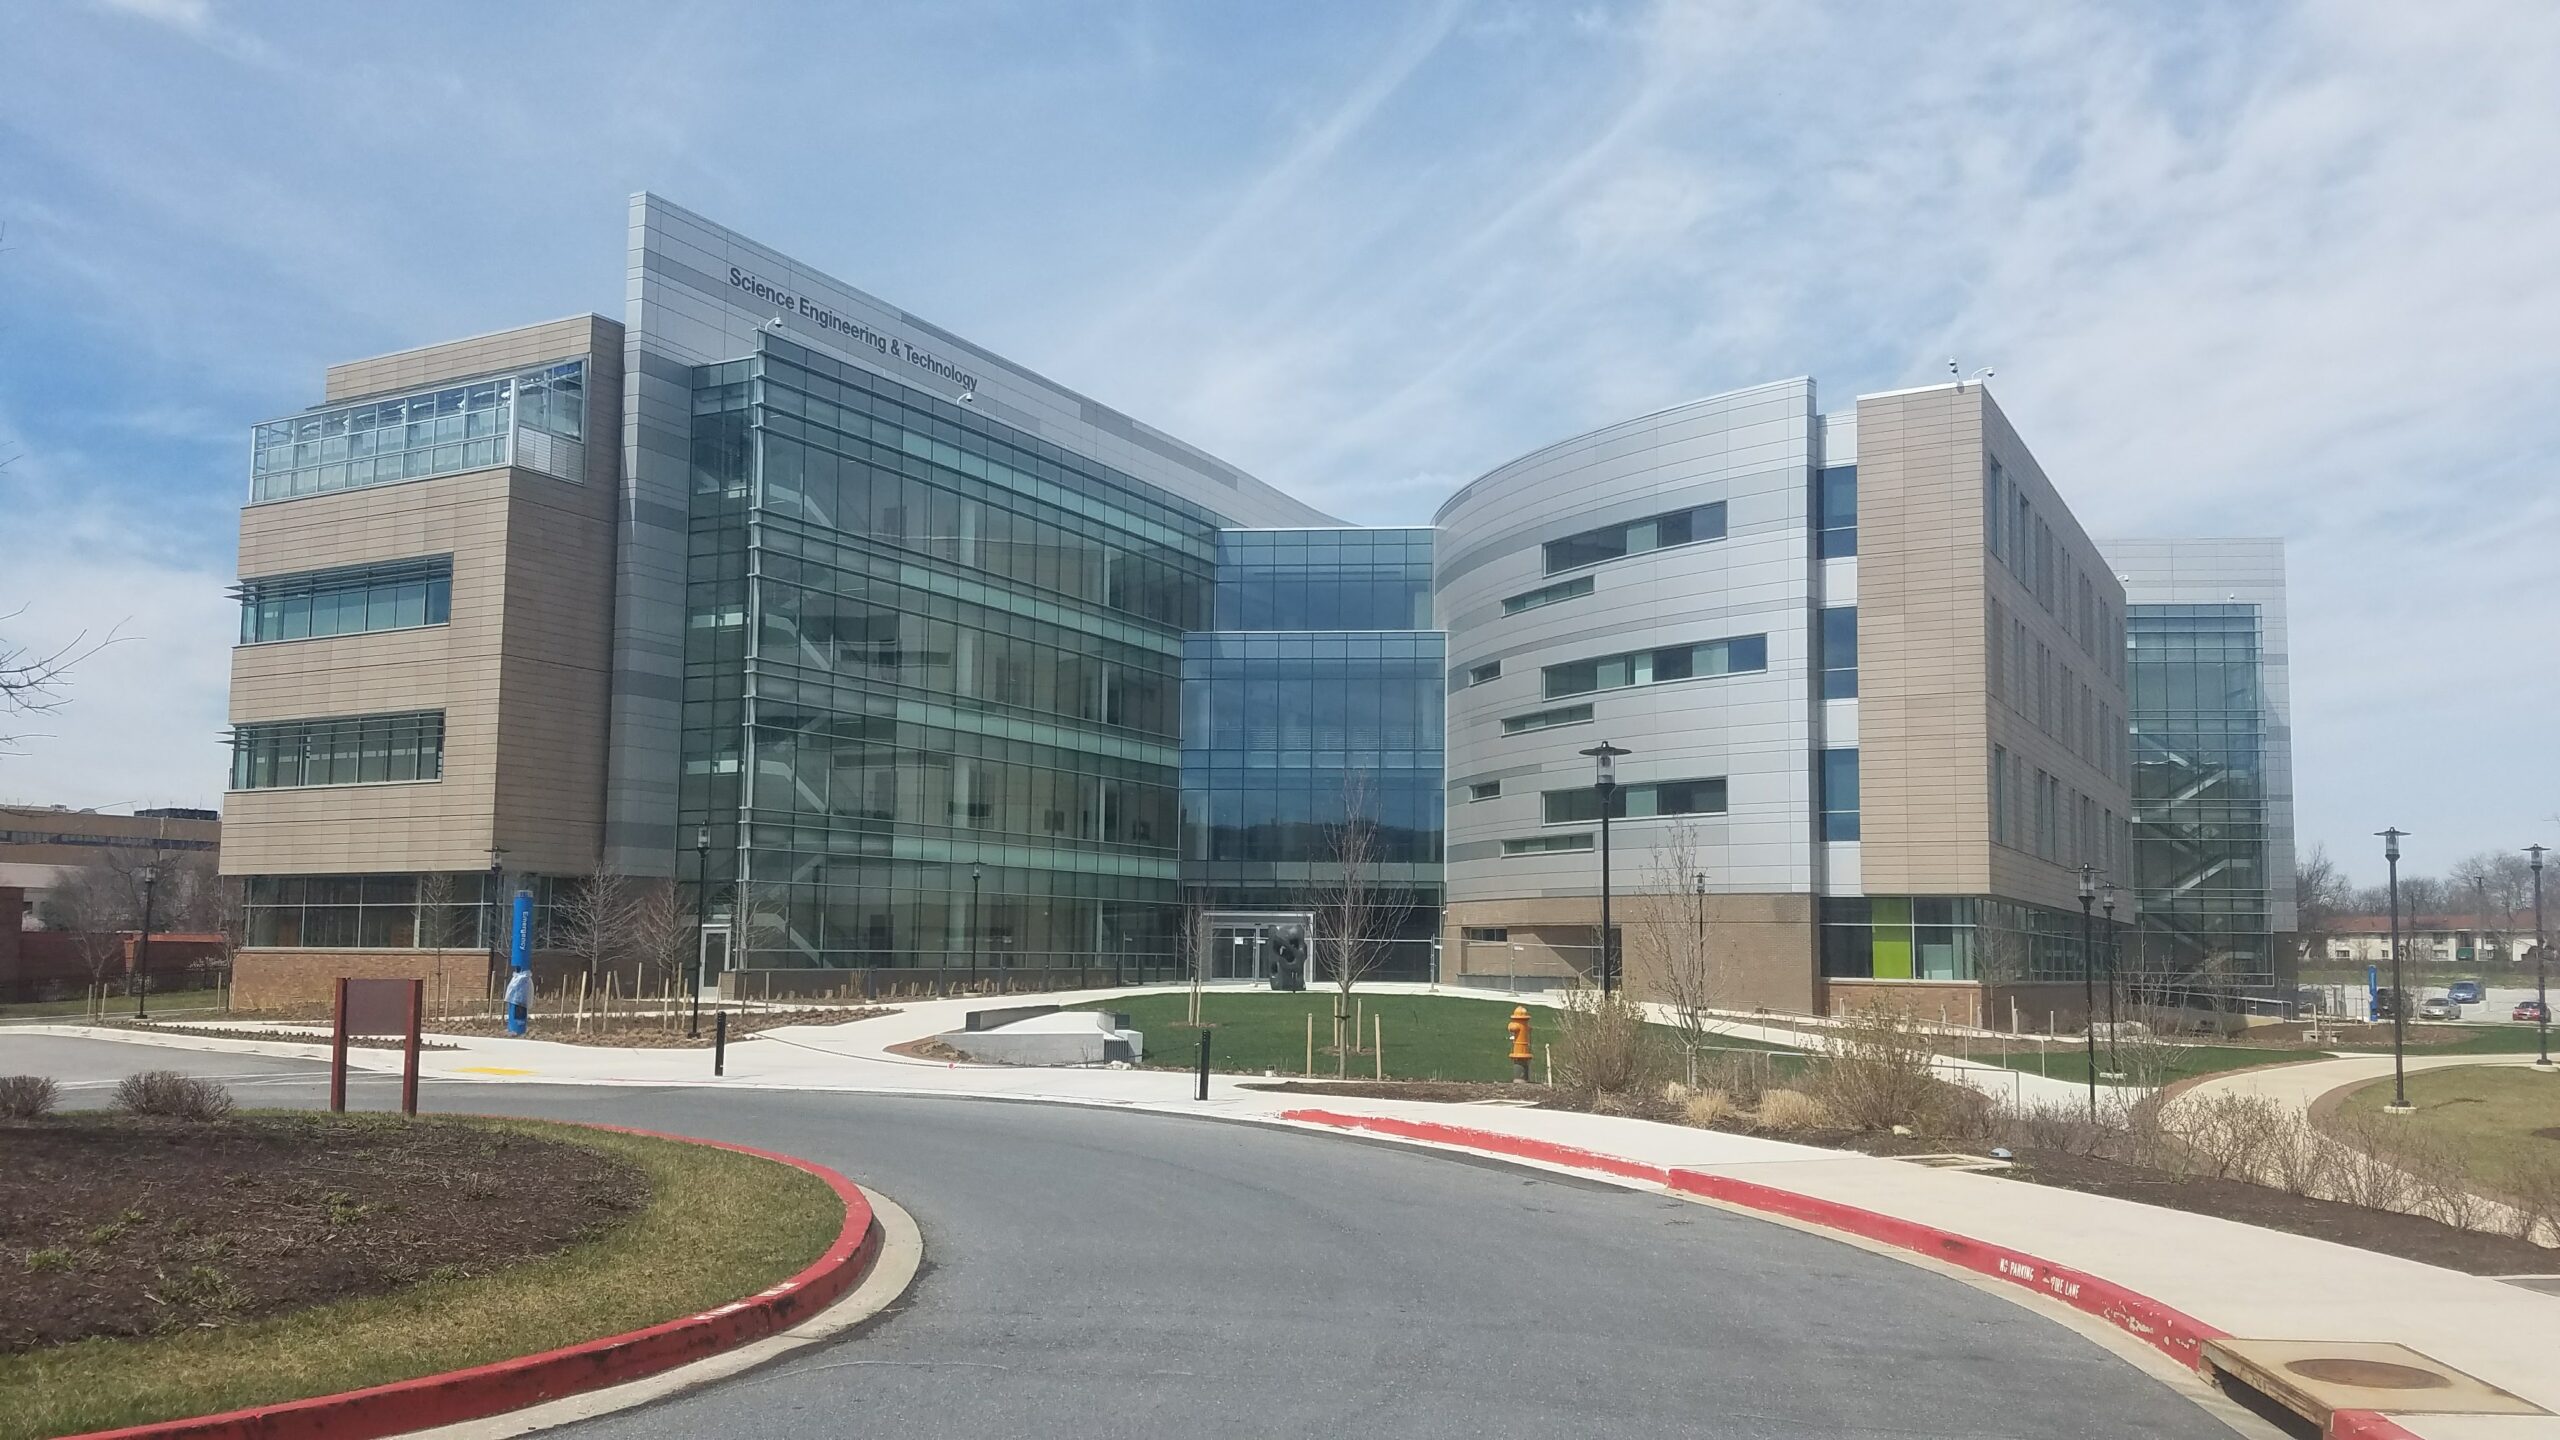 Universities at Shady Grove Biomedical Sciences & Engineering Education Building, Rockville, MD